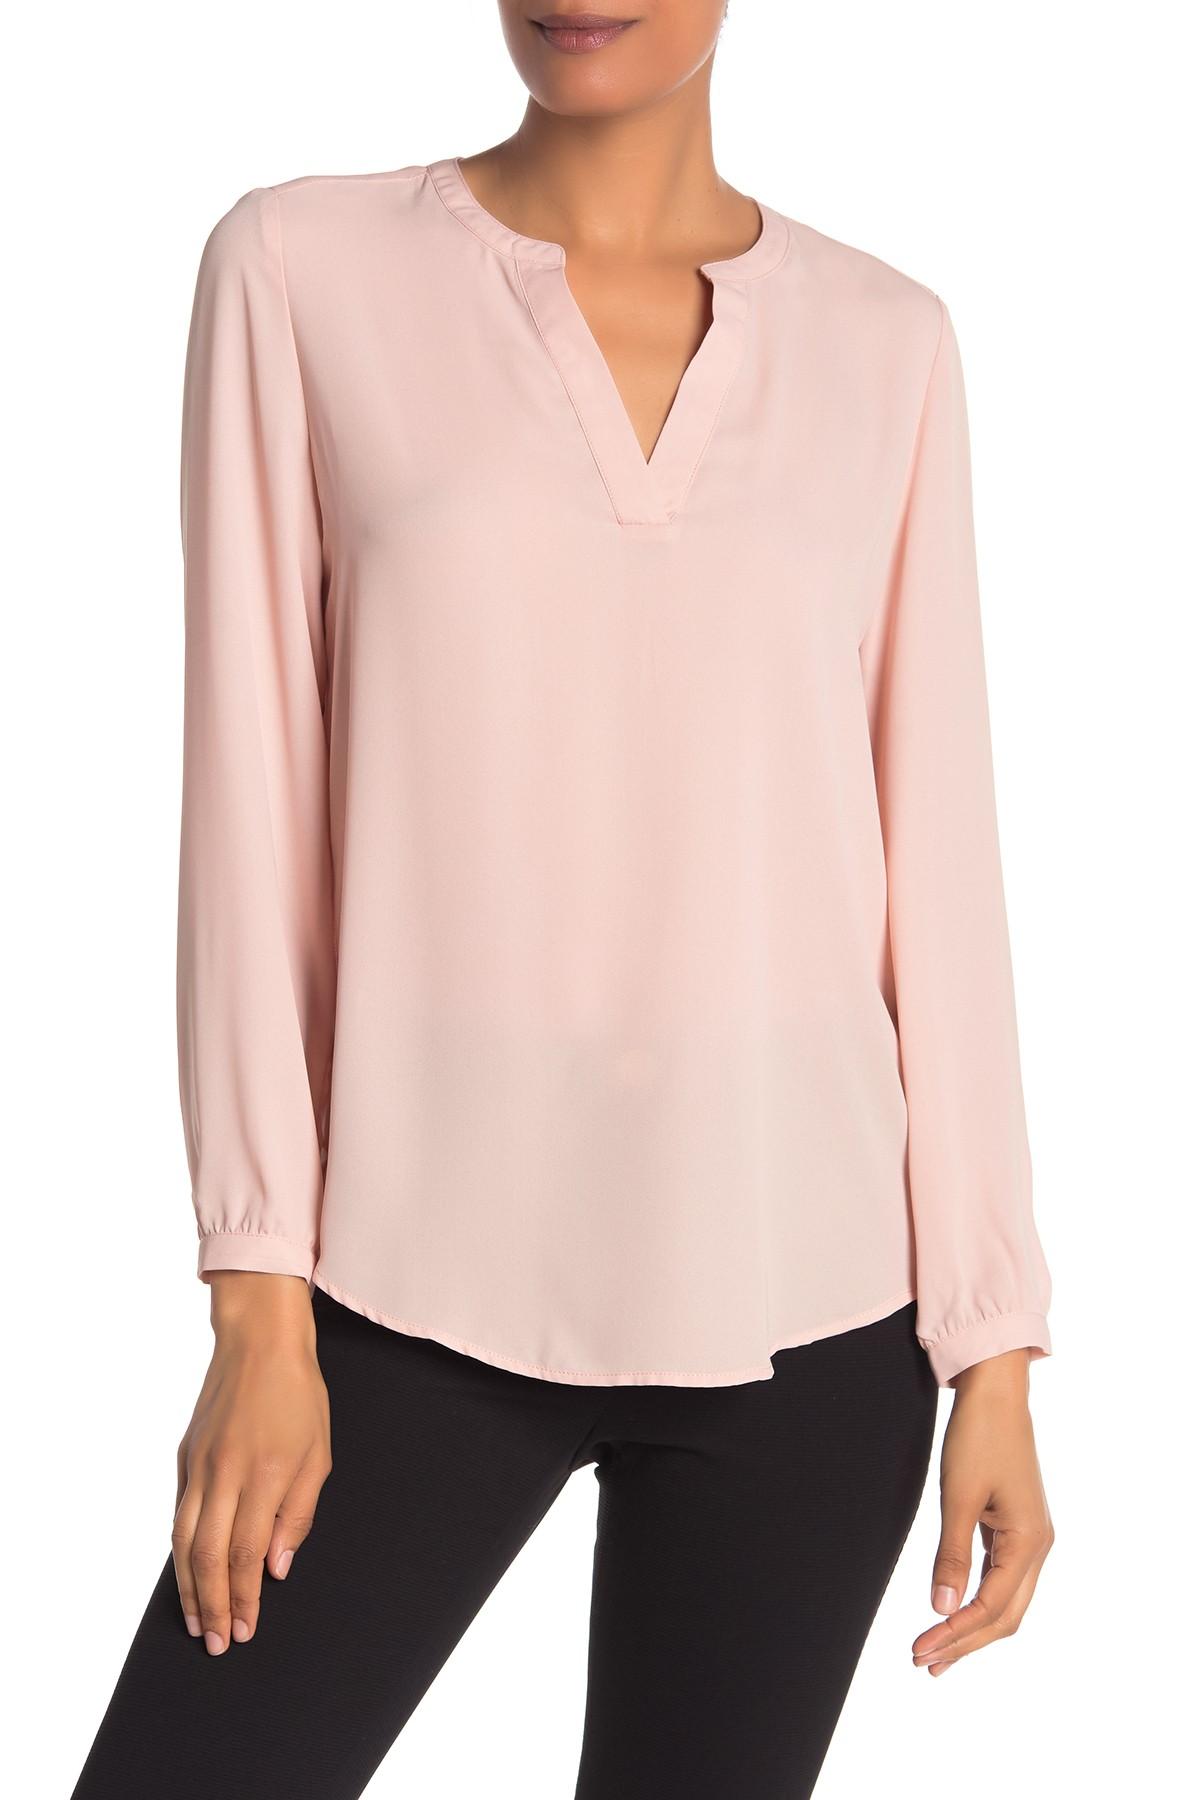 Adrianna Papell Split Neck Long Sleeve Blouse in Pink | Lyst